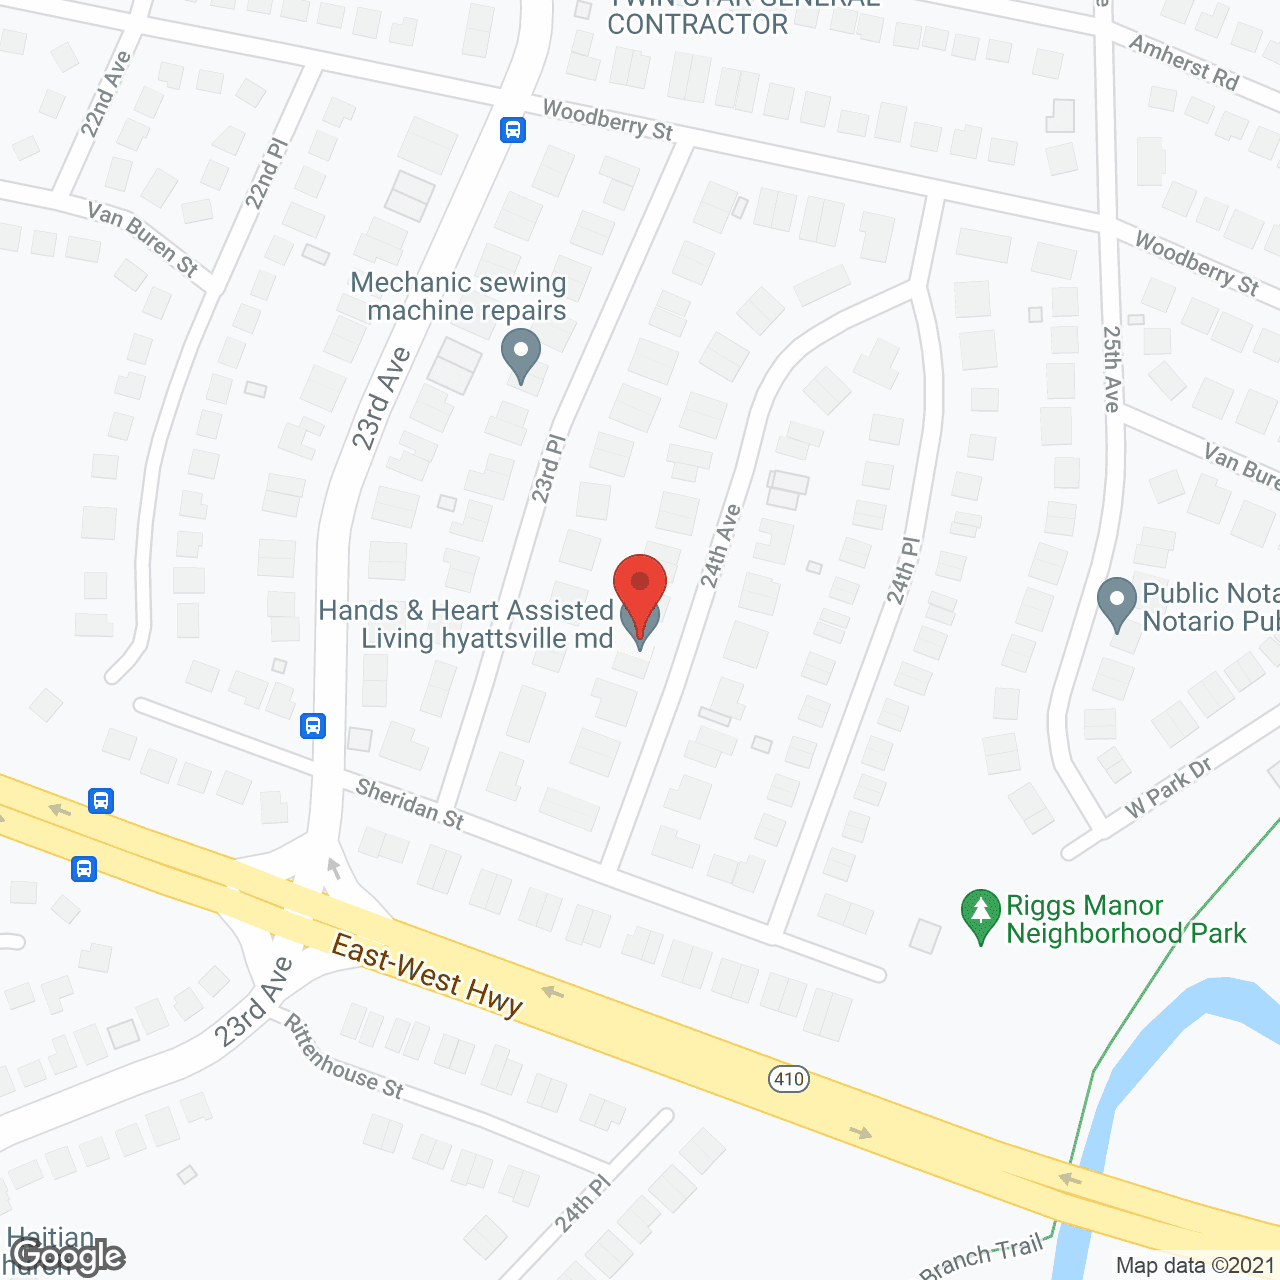 Hands and Heart Assisted Living Hyattsville in google map